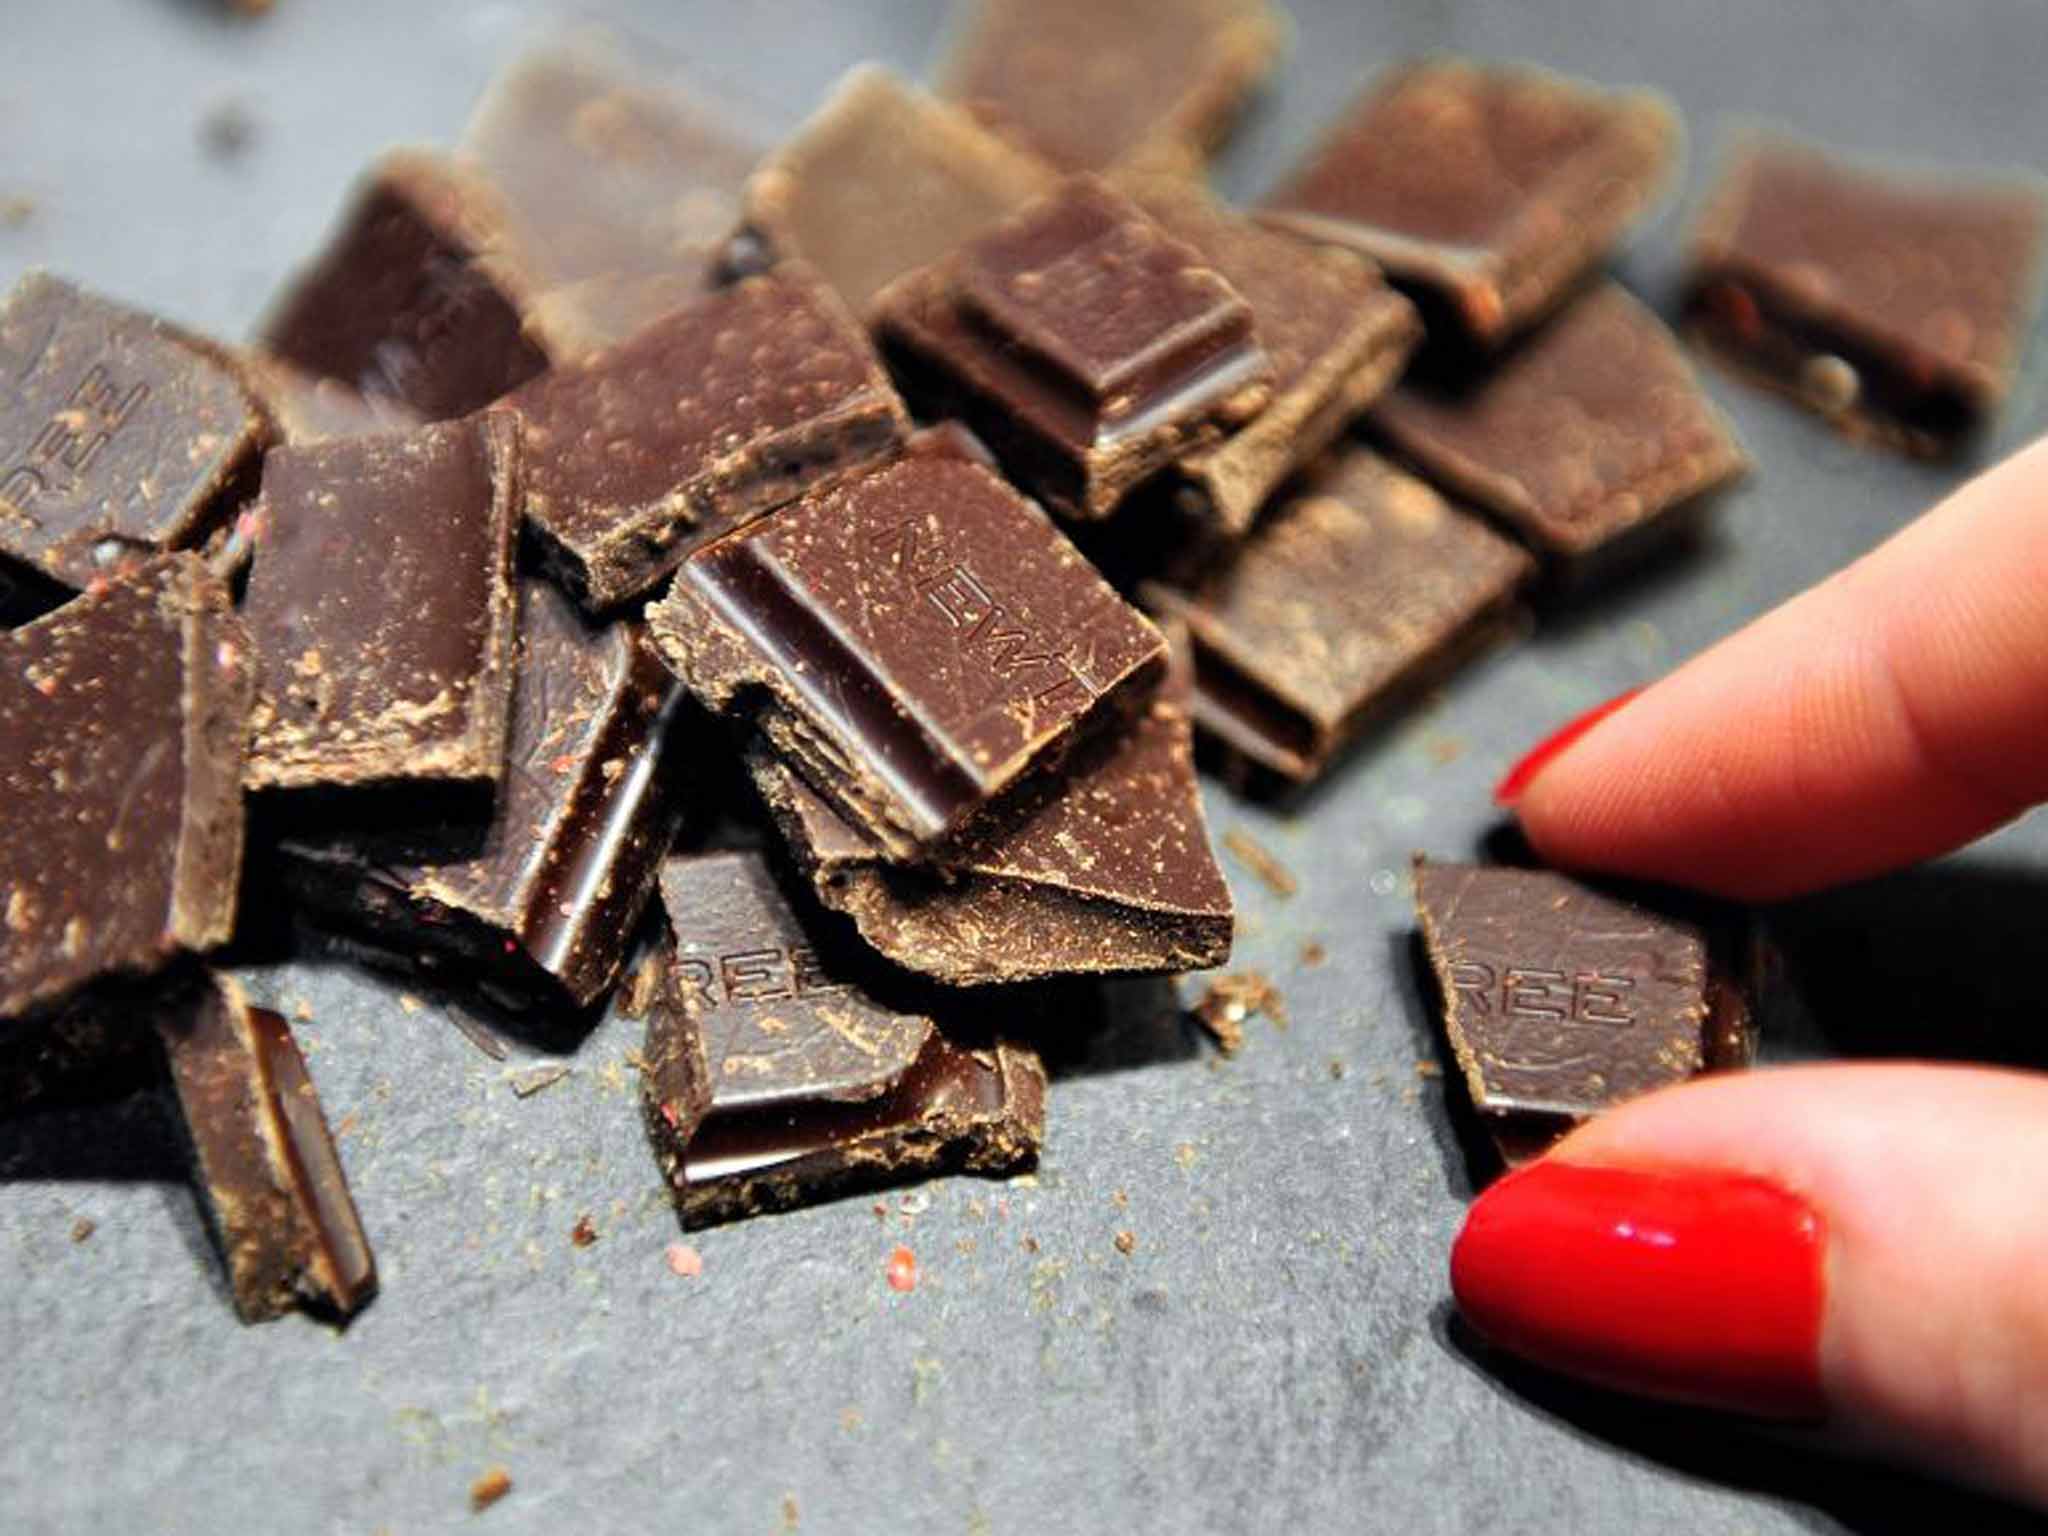 Dark chocolate tends to have a bitter taste that many don't like